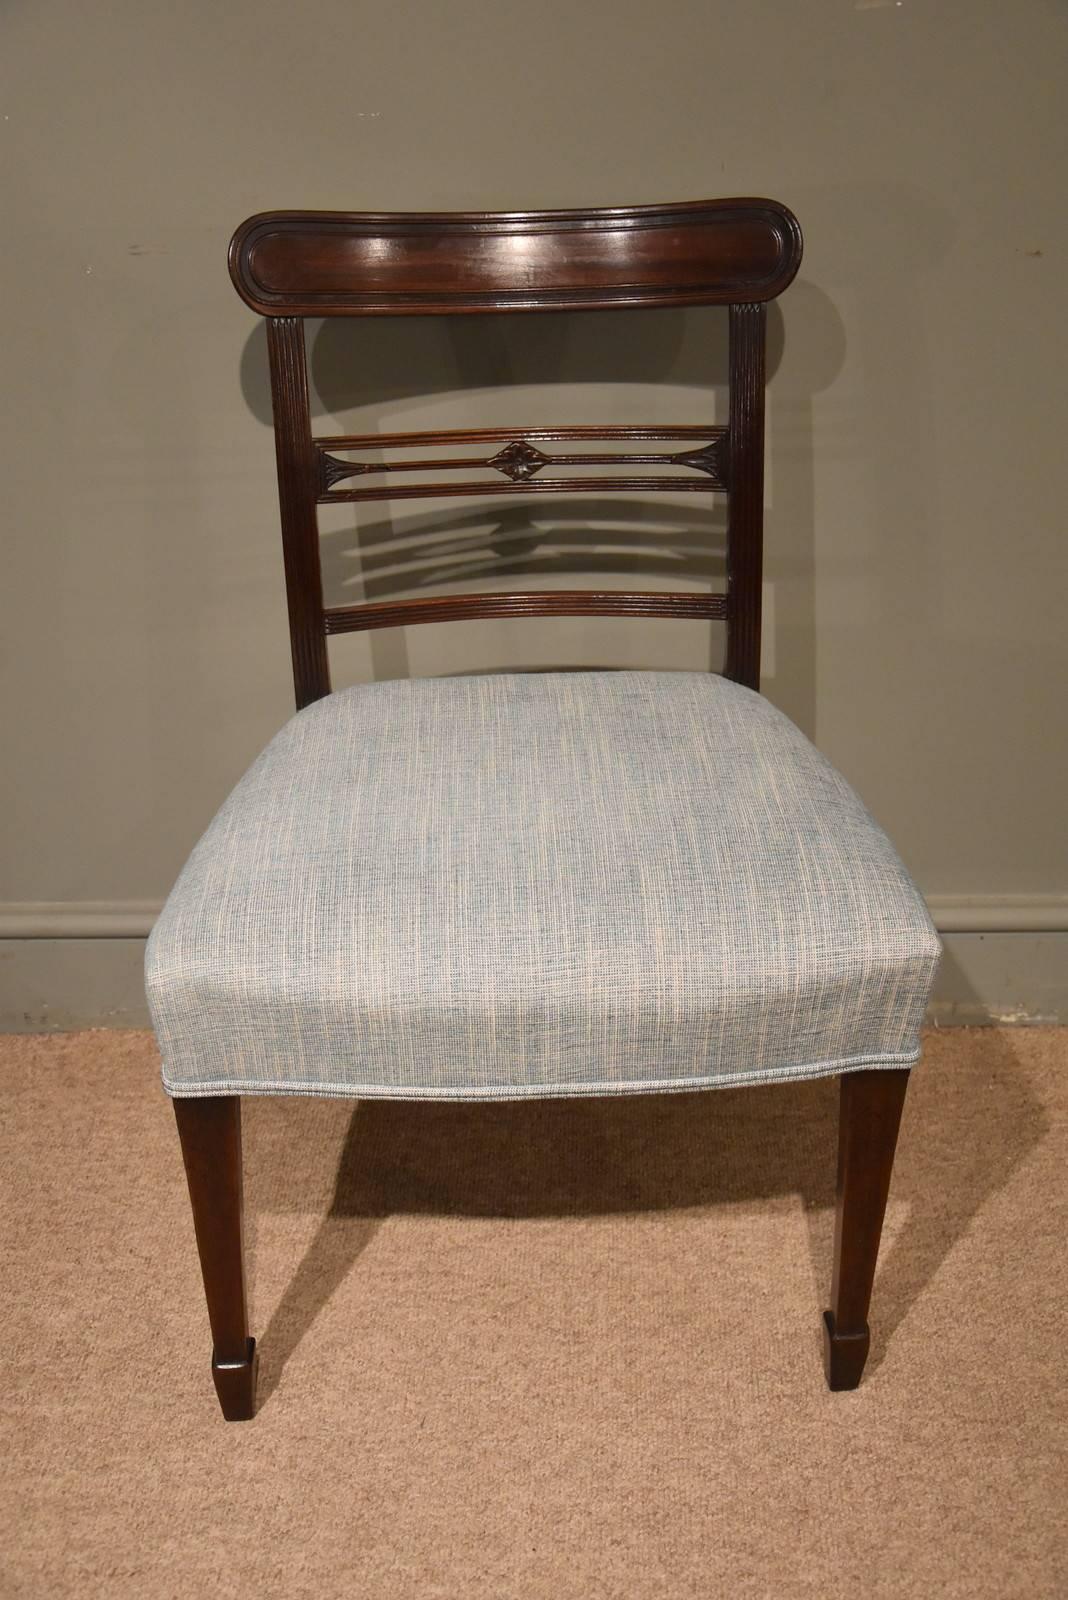 A set of six Regency period mahogany dining chairs

Dimensions
Height 33